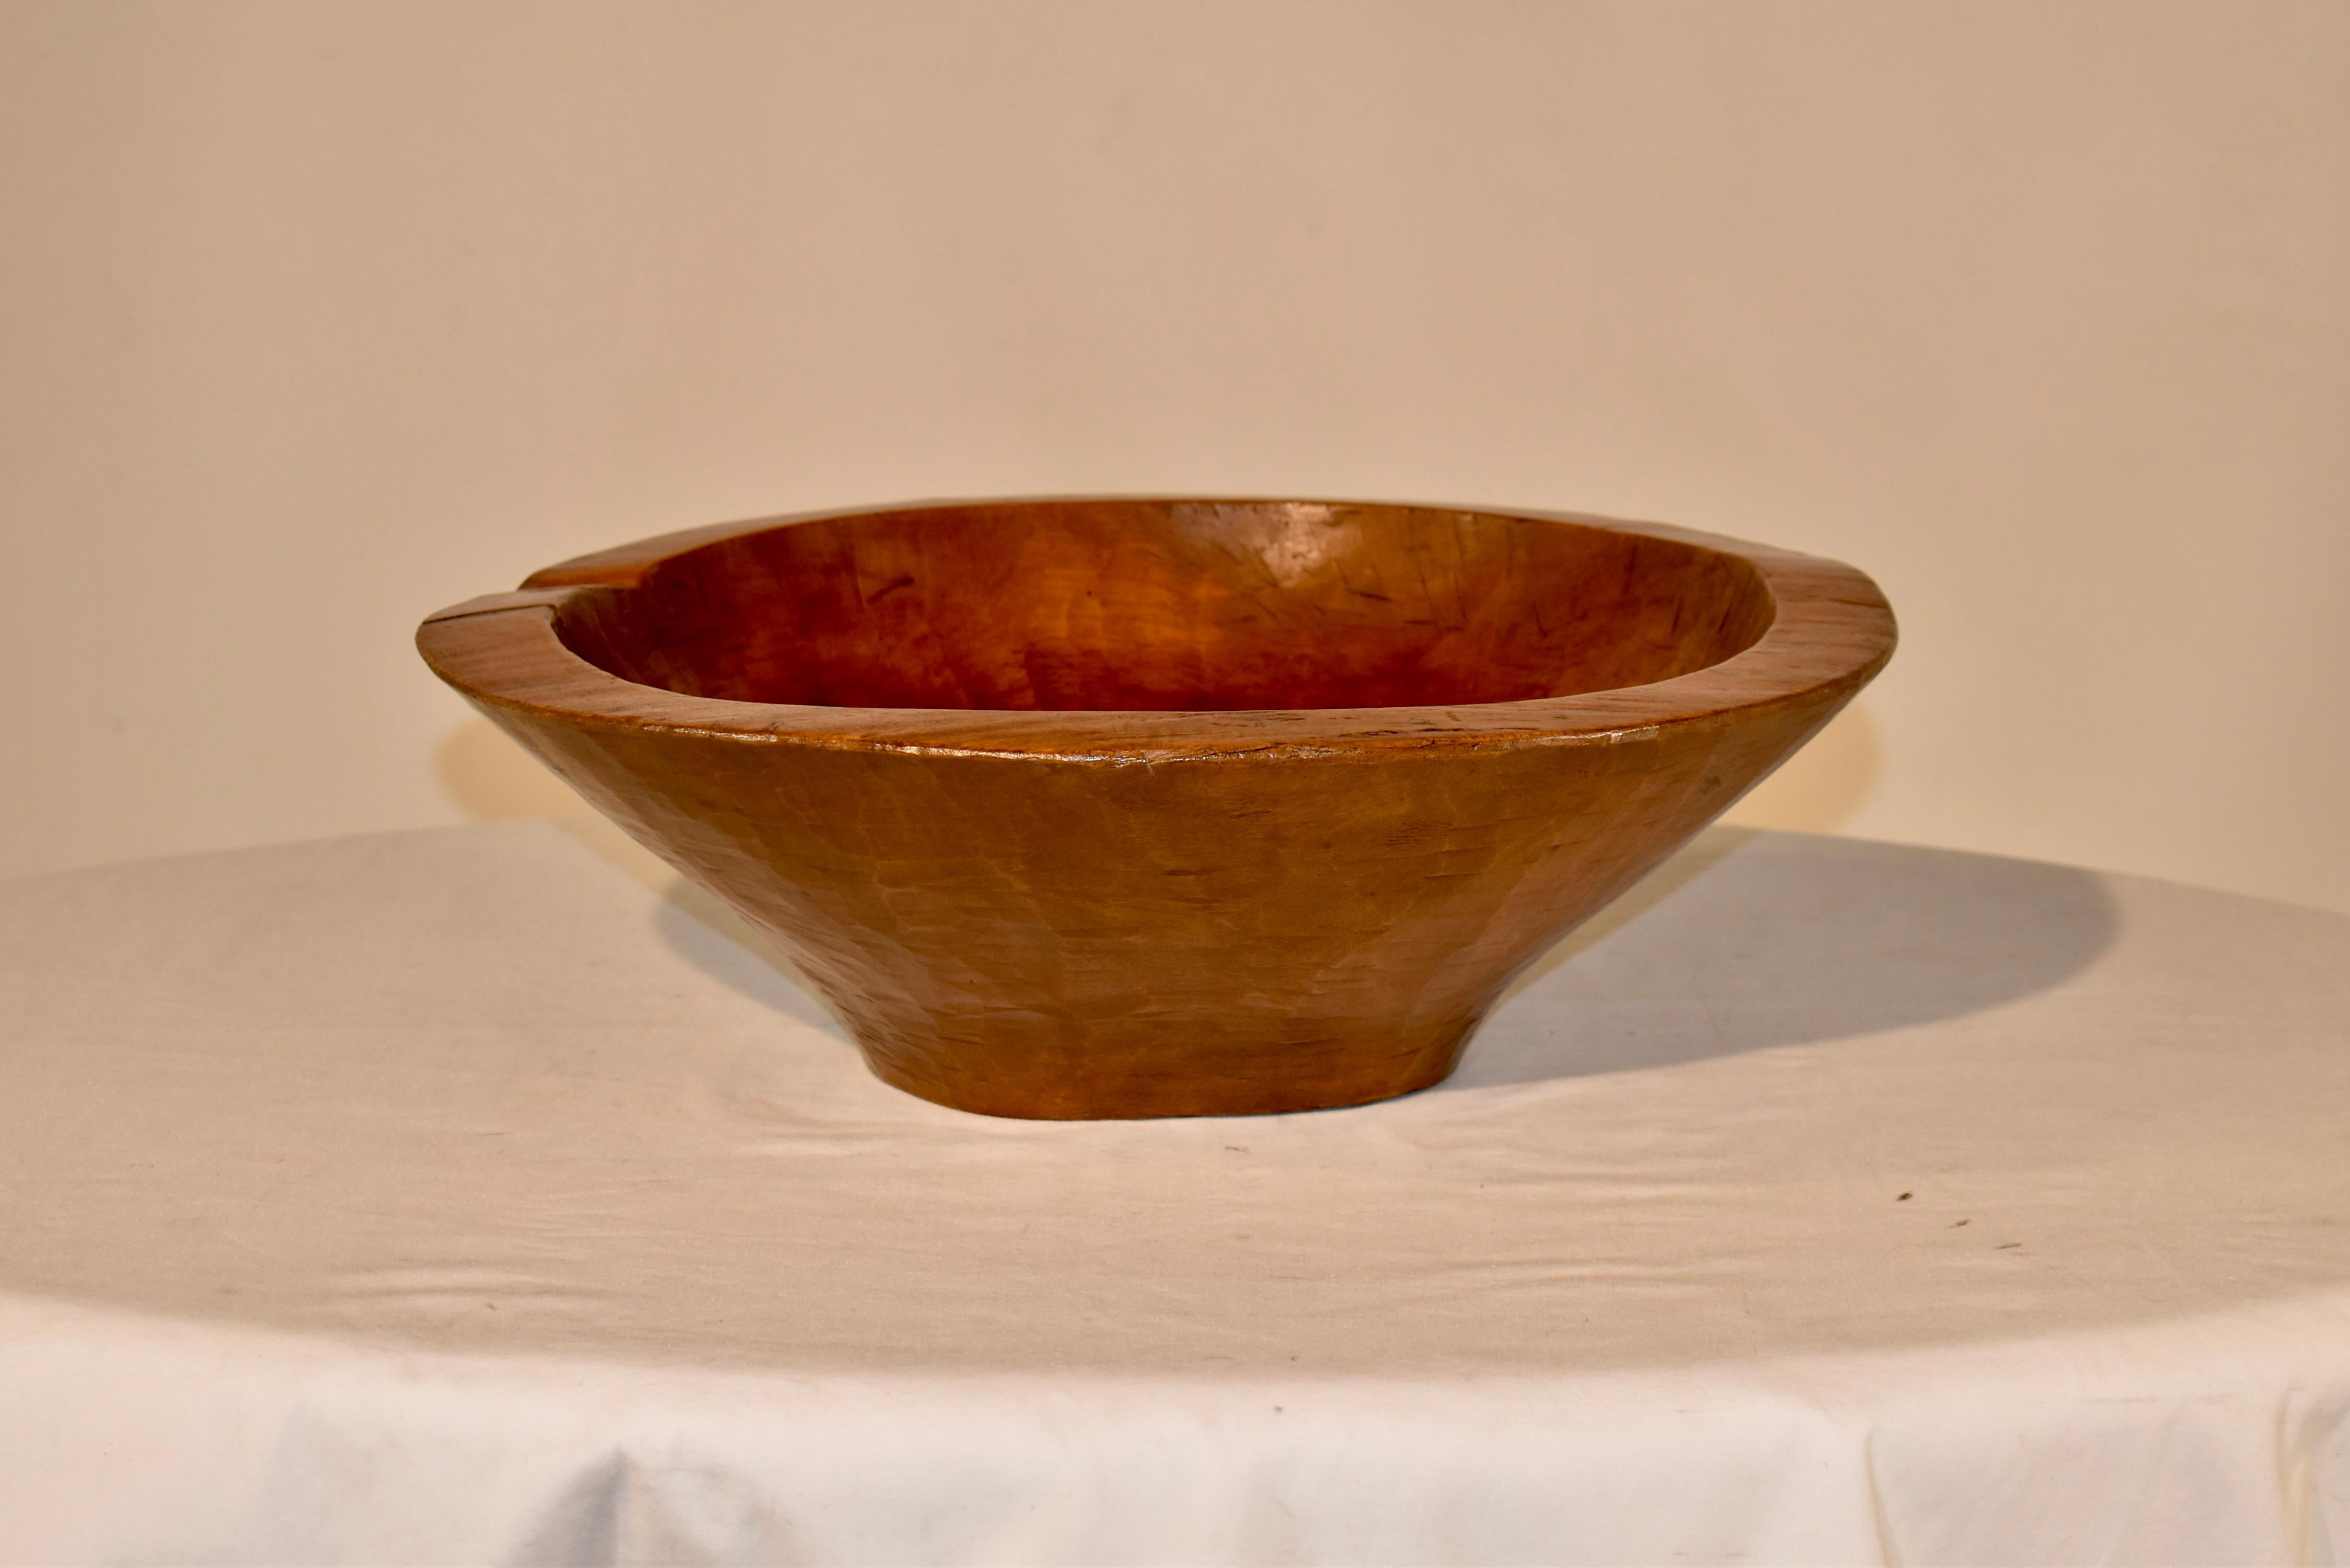 19th century Han hewn bowl from France made from Sycamore. This is a gorgeous thick bowl which has been hand hewn which adds a lovely texture to the piece. The bowl measures 5 inches in depth in the interior.